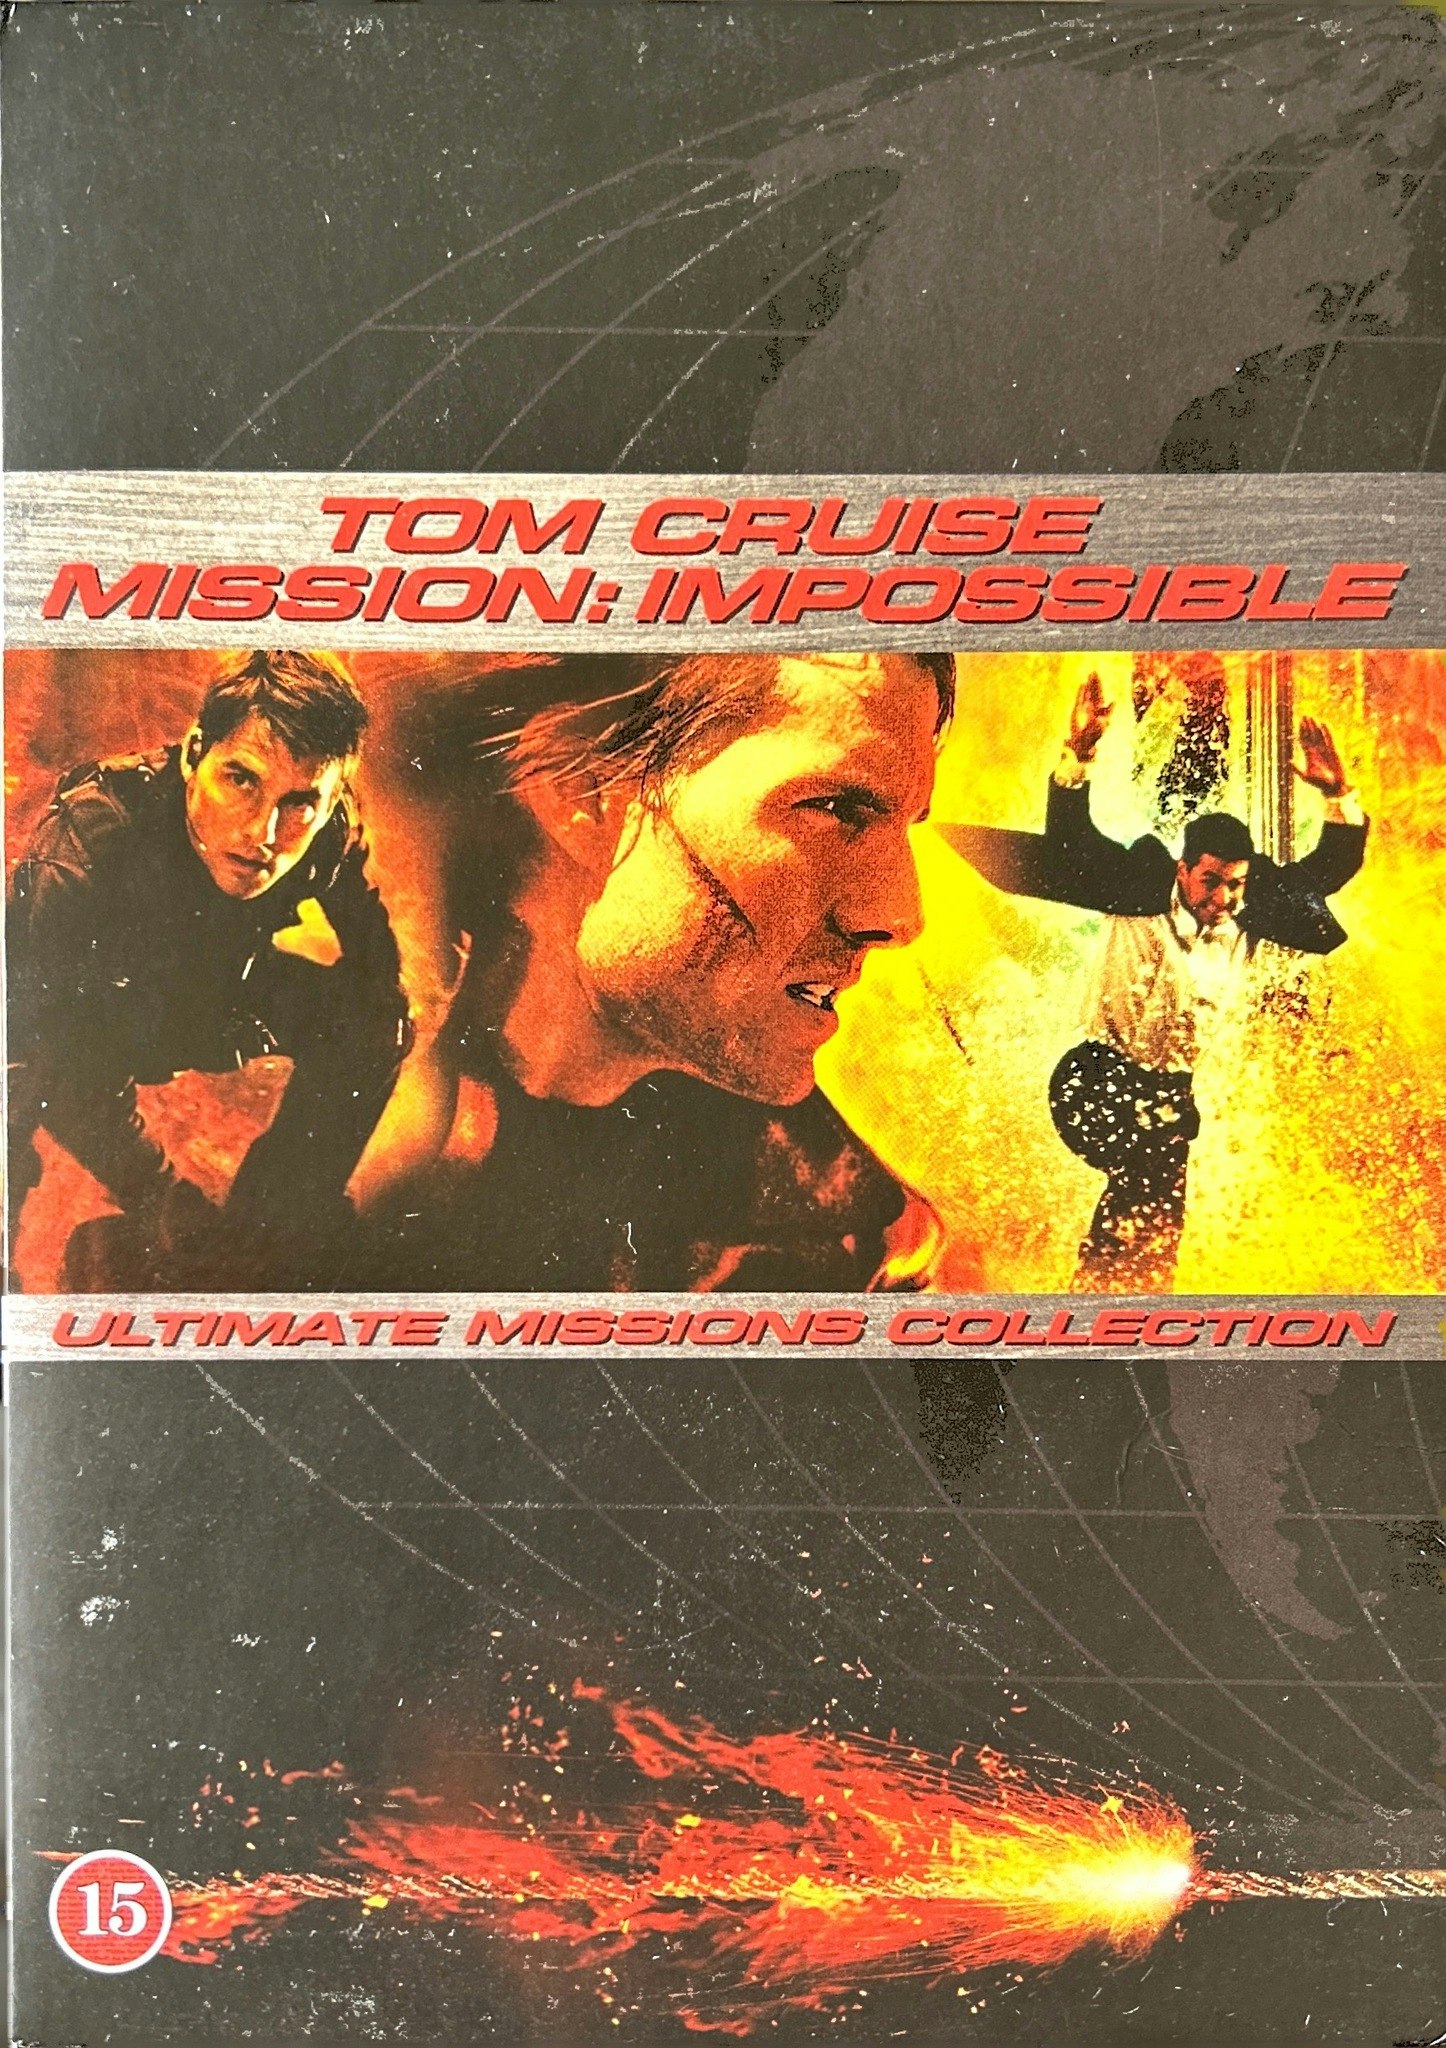 Mission Impossible Trilogy Box (Beg. UK Import DVD)